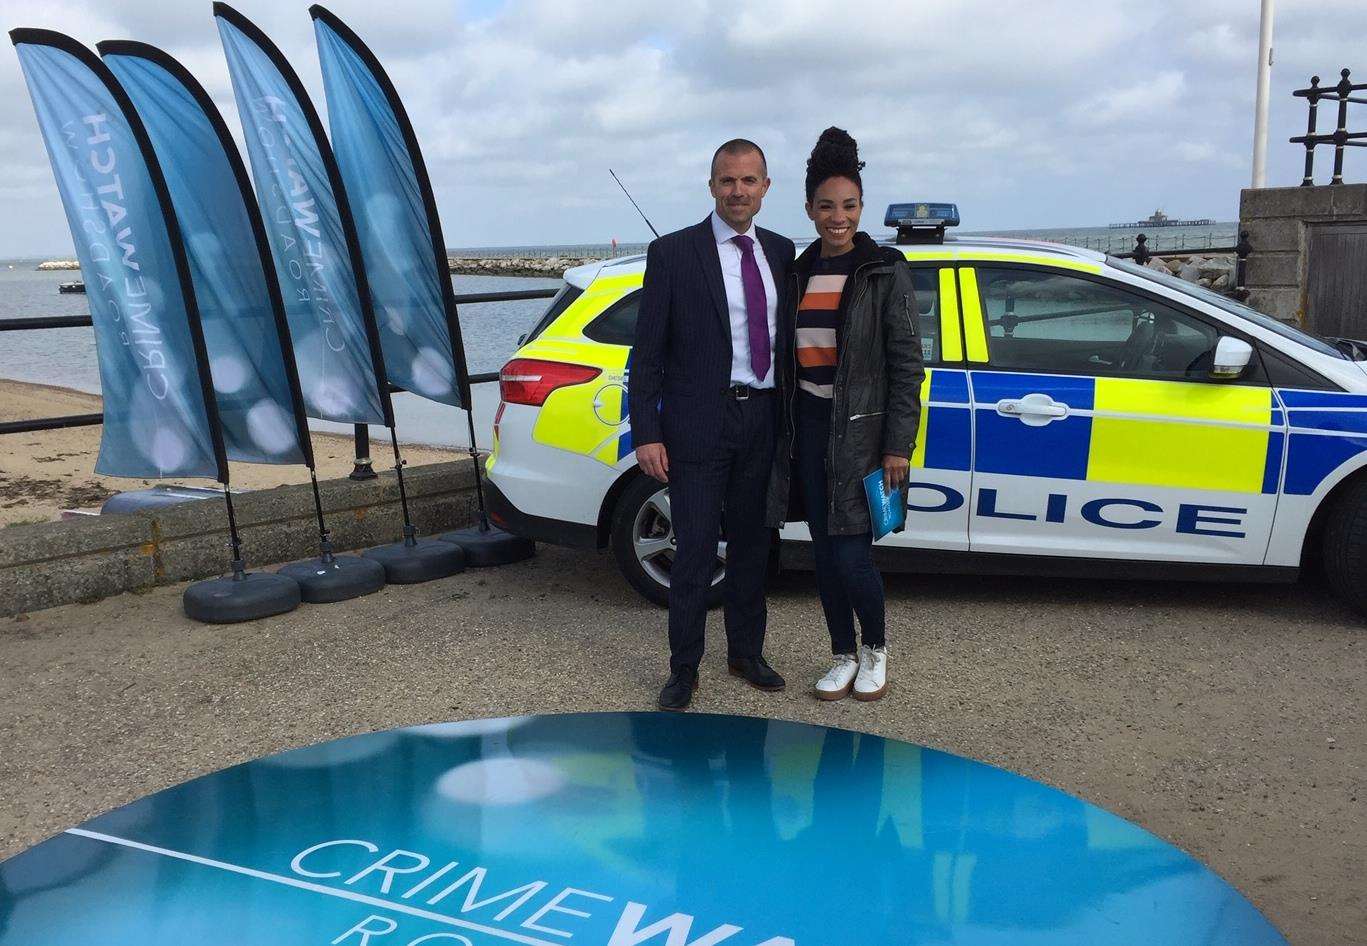 Marc Cananur with Michelle Ackerley on Crimewatch Roadshow